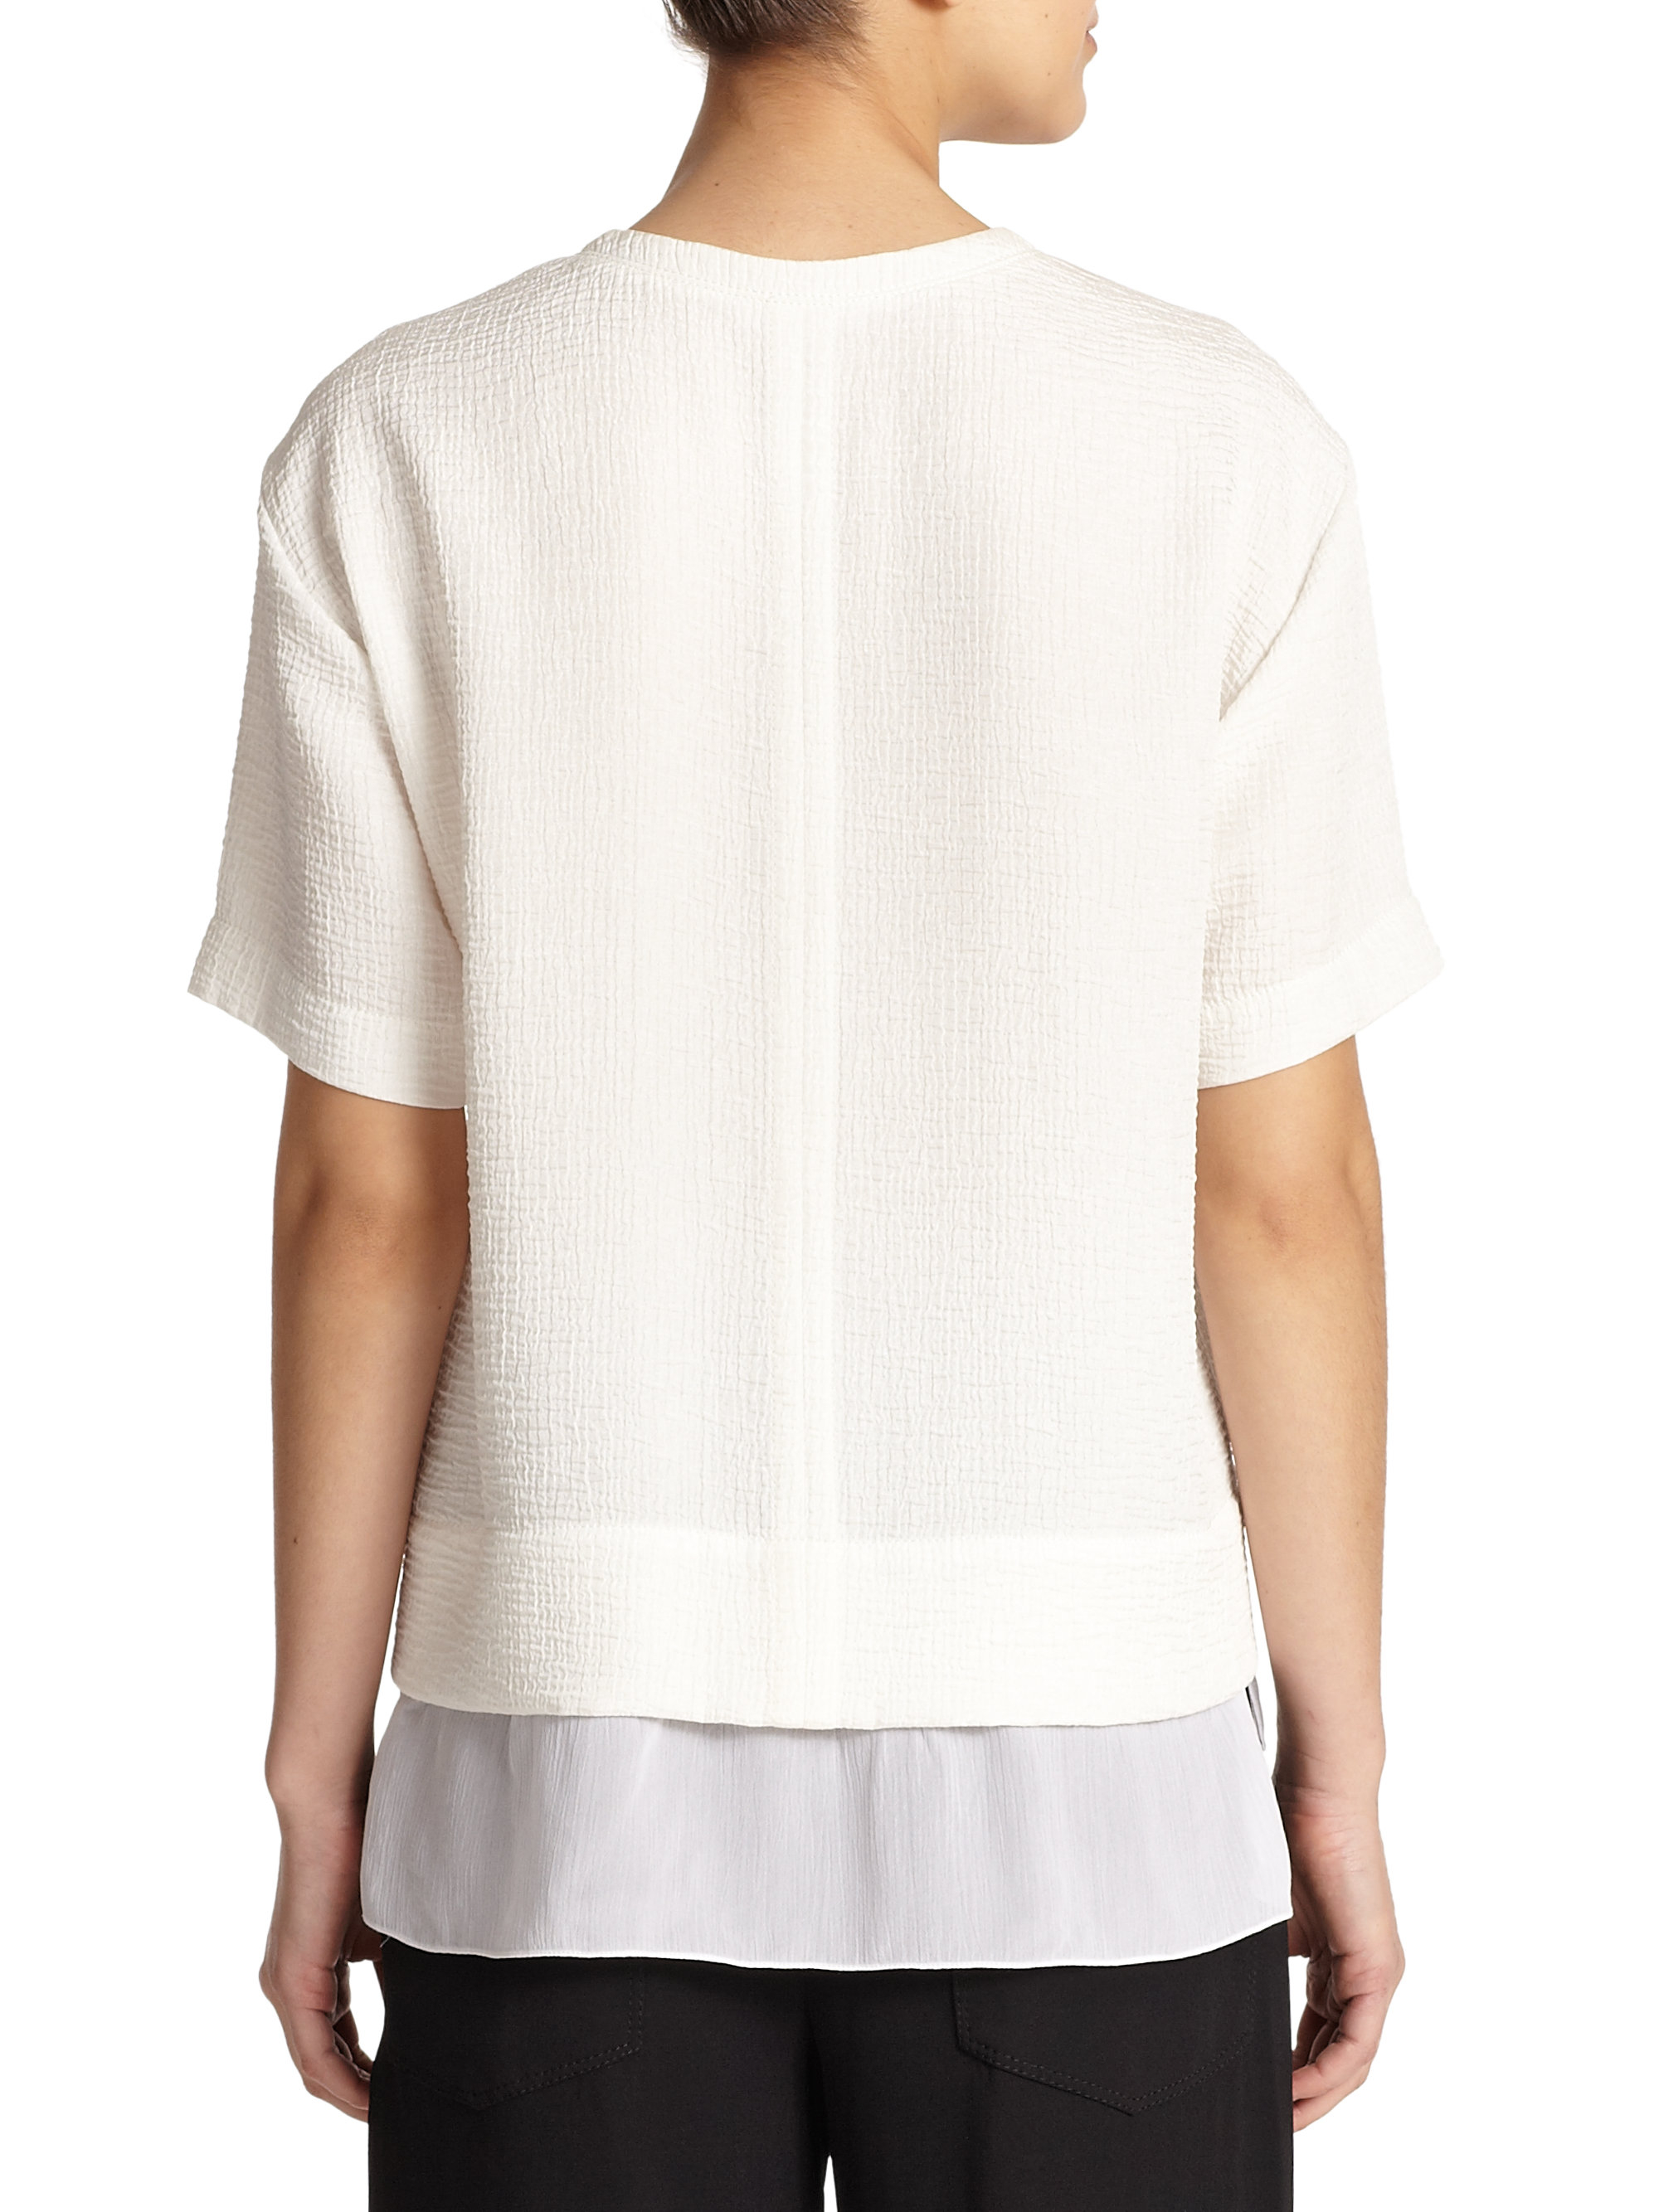 Helmut lang Layered Tissue Silk Top in White | Lyst